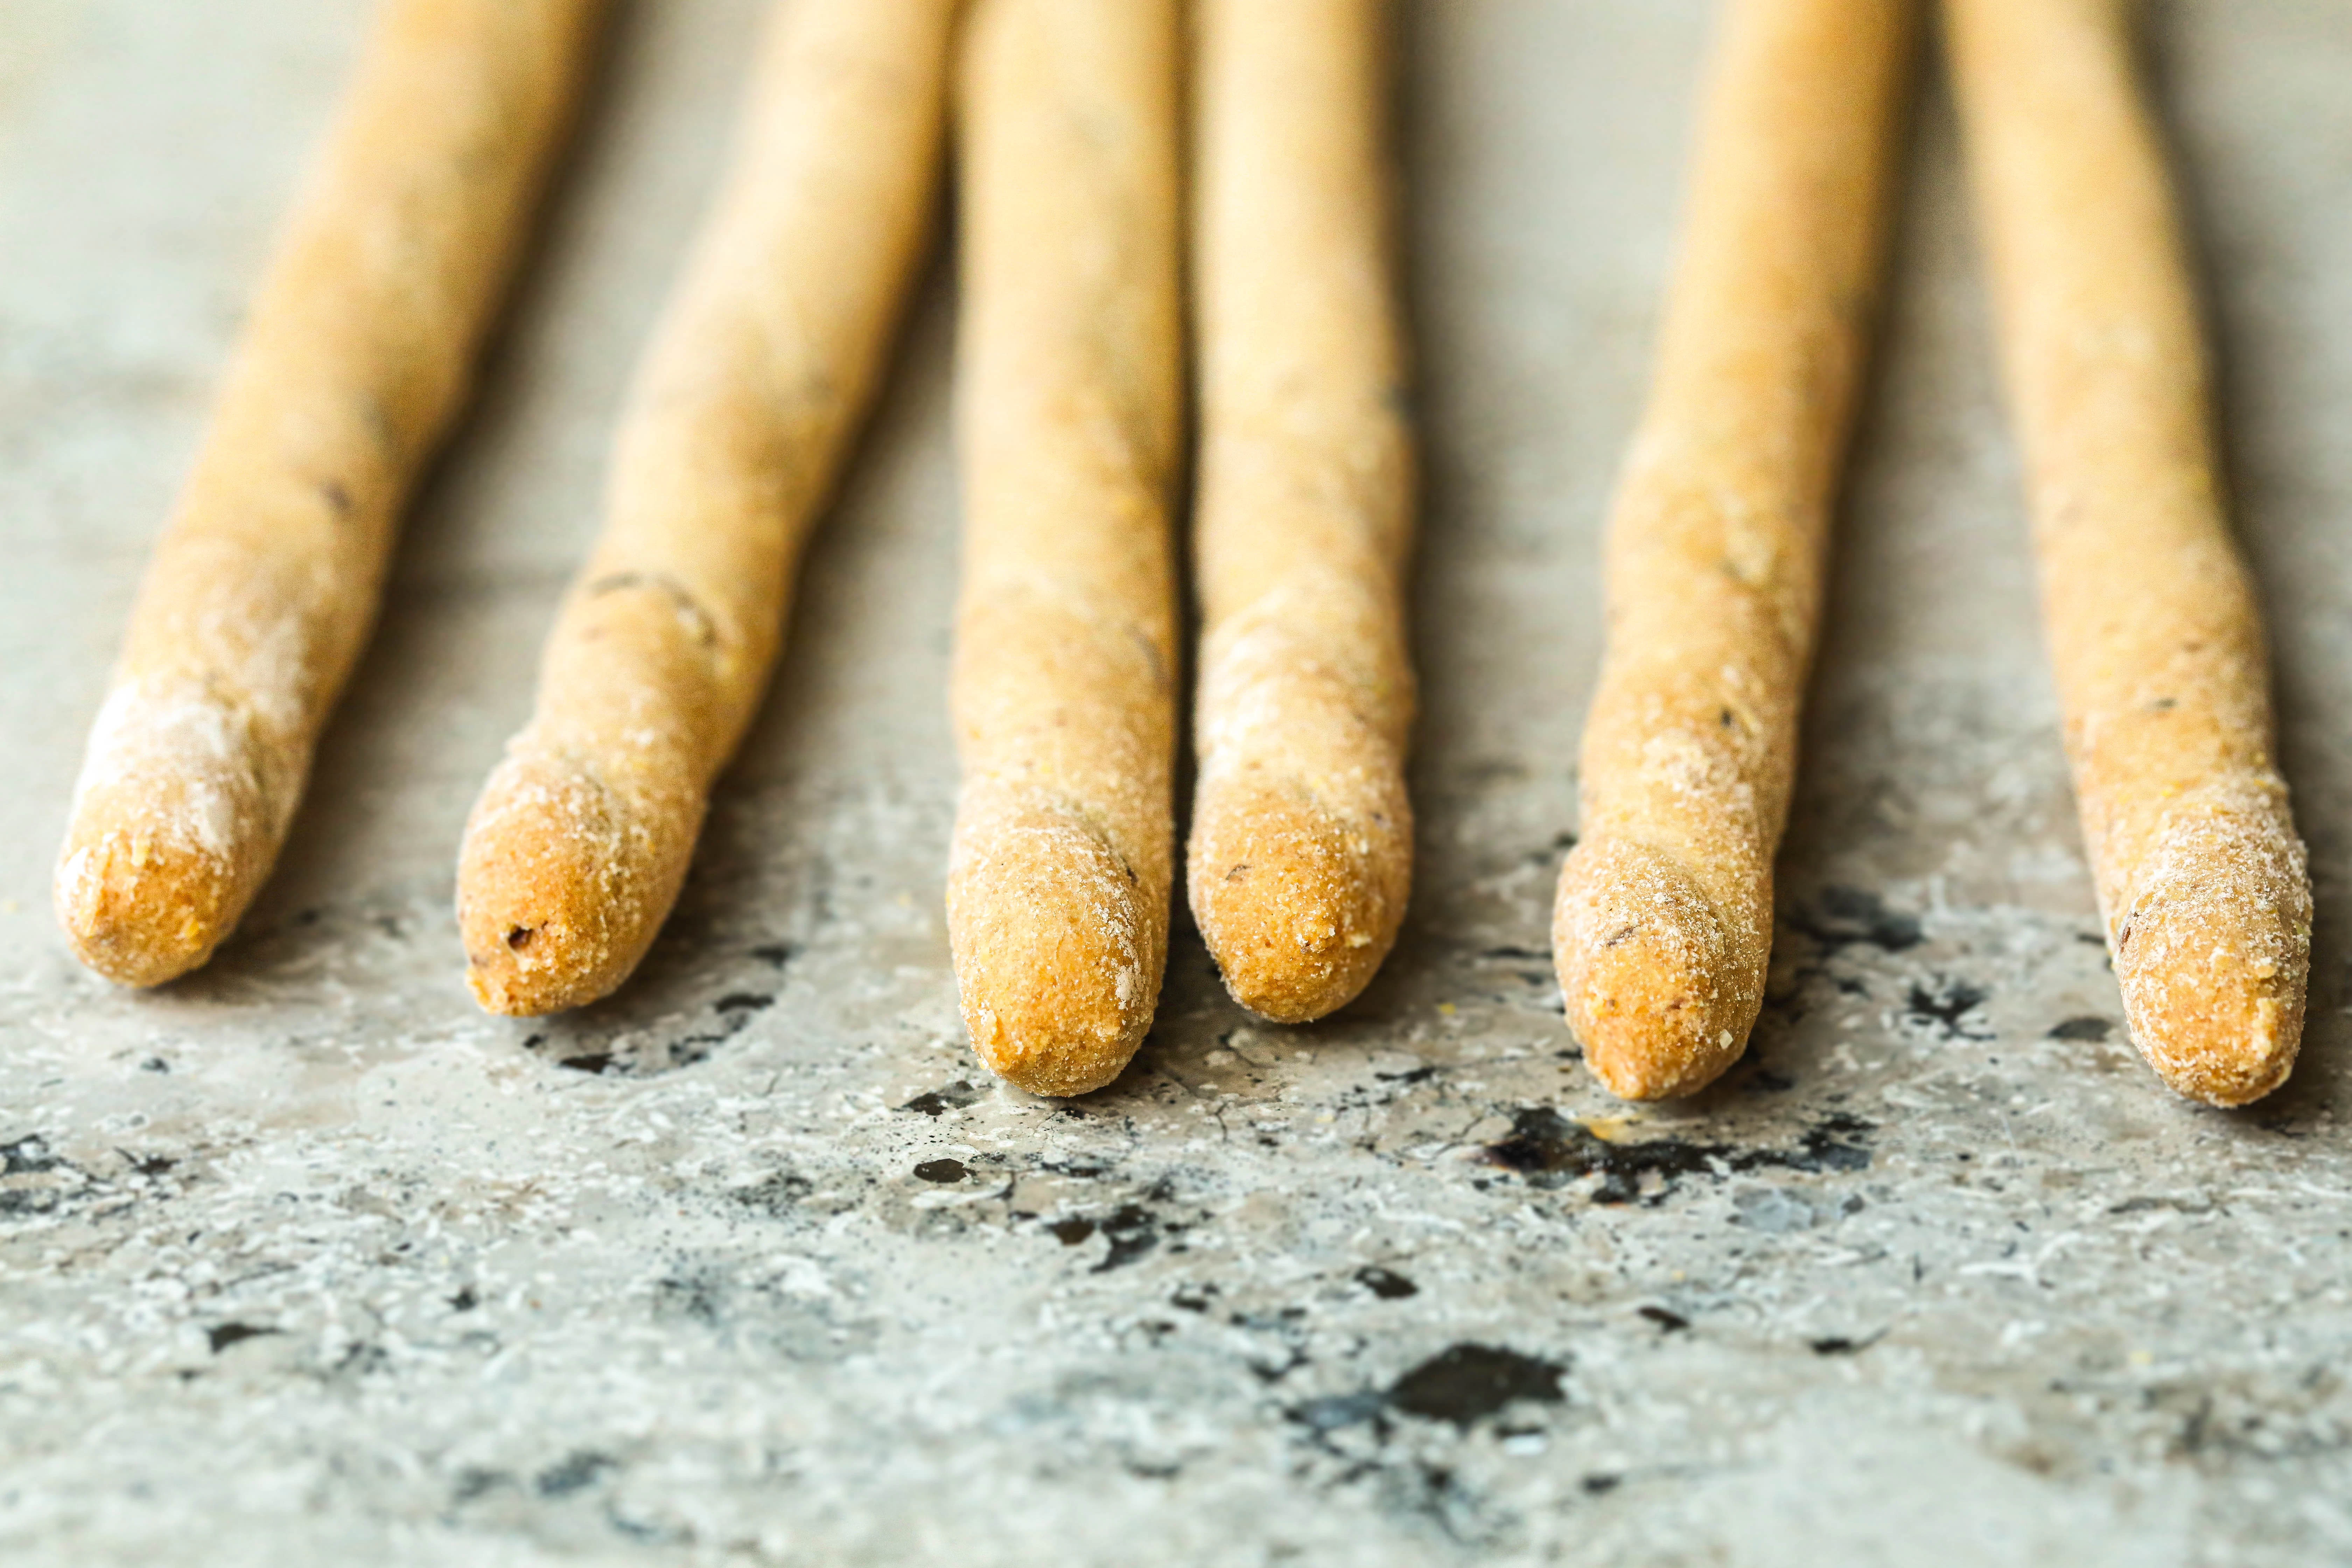 The end of six breadsticks.